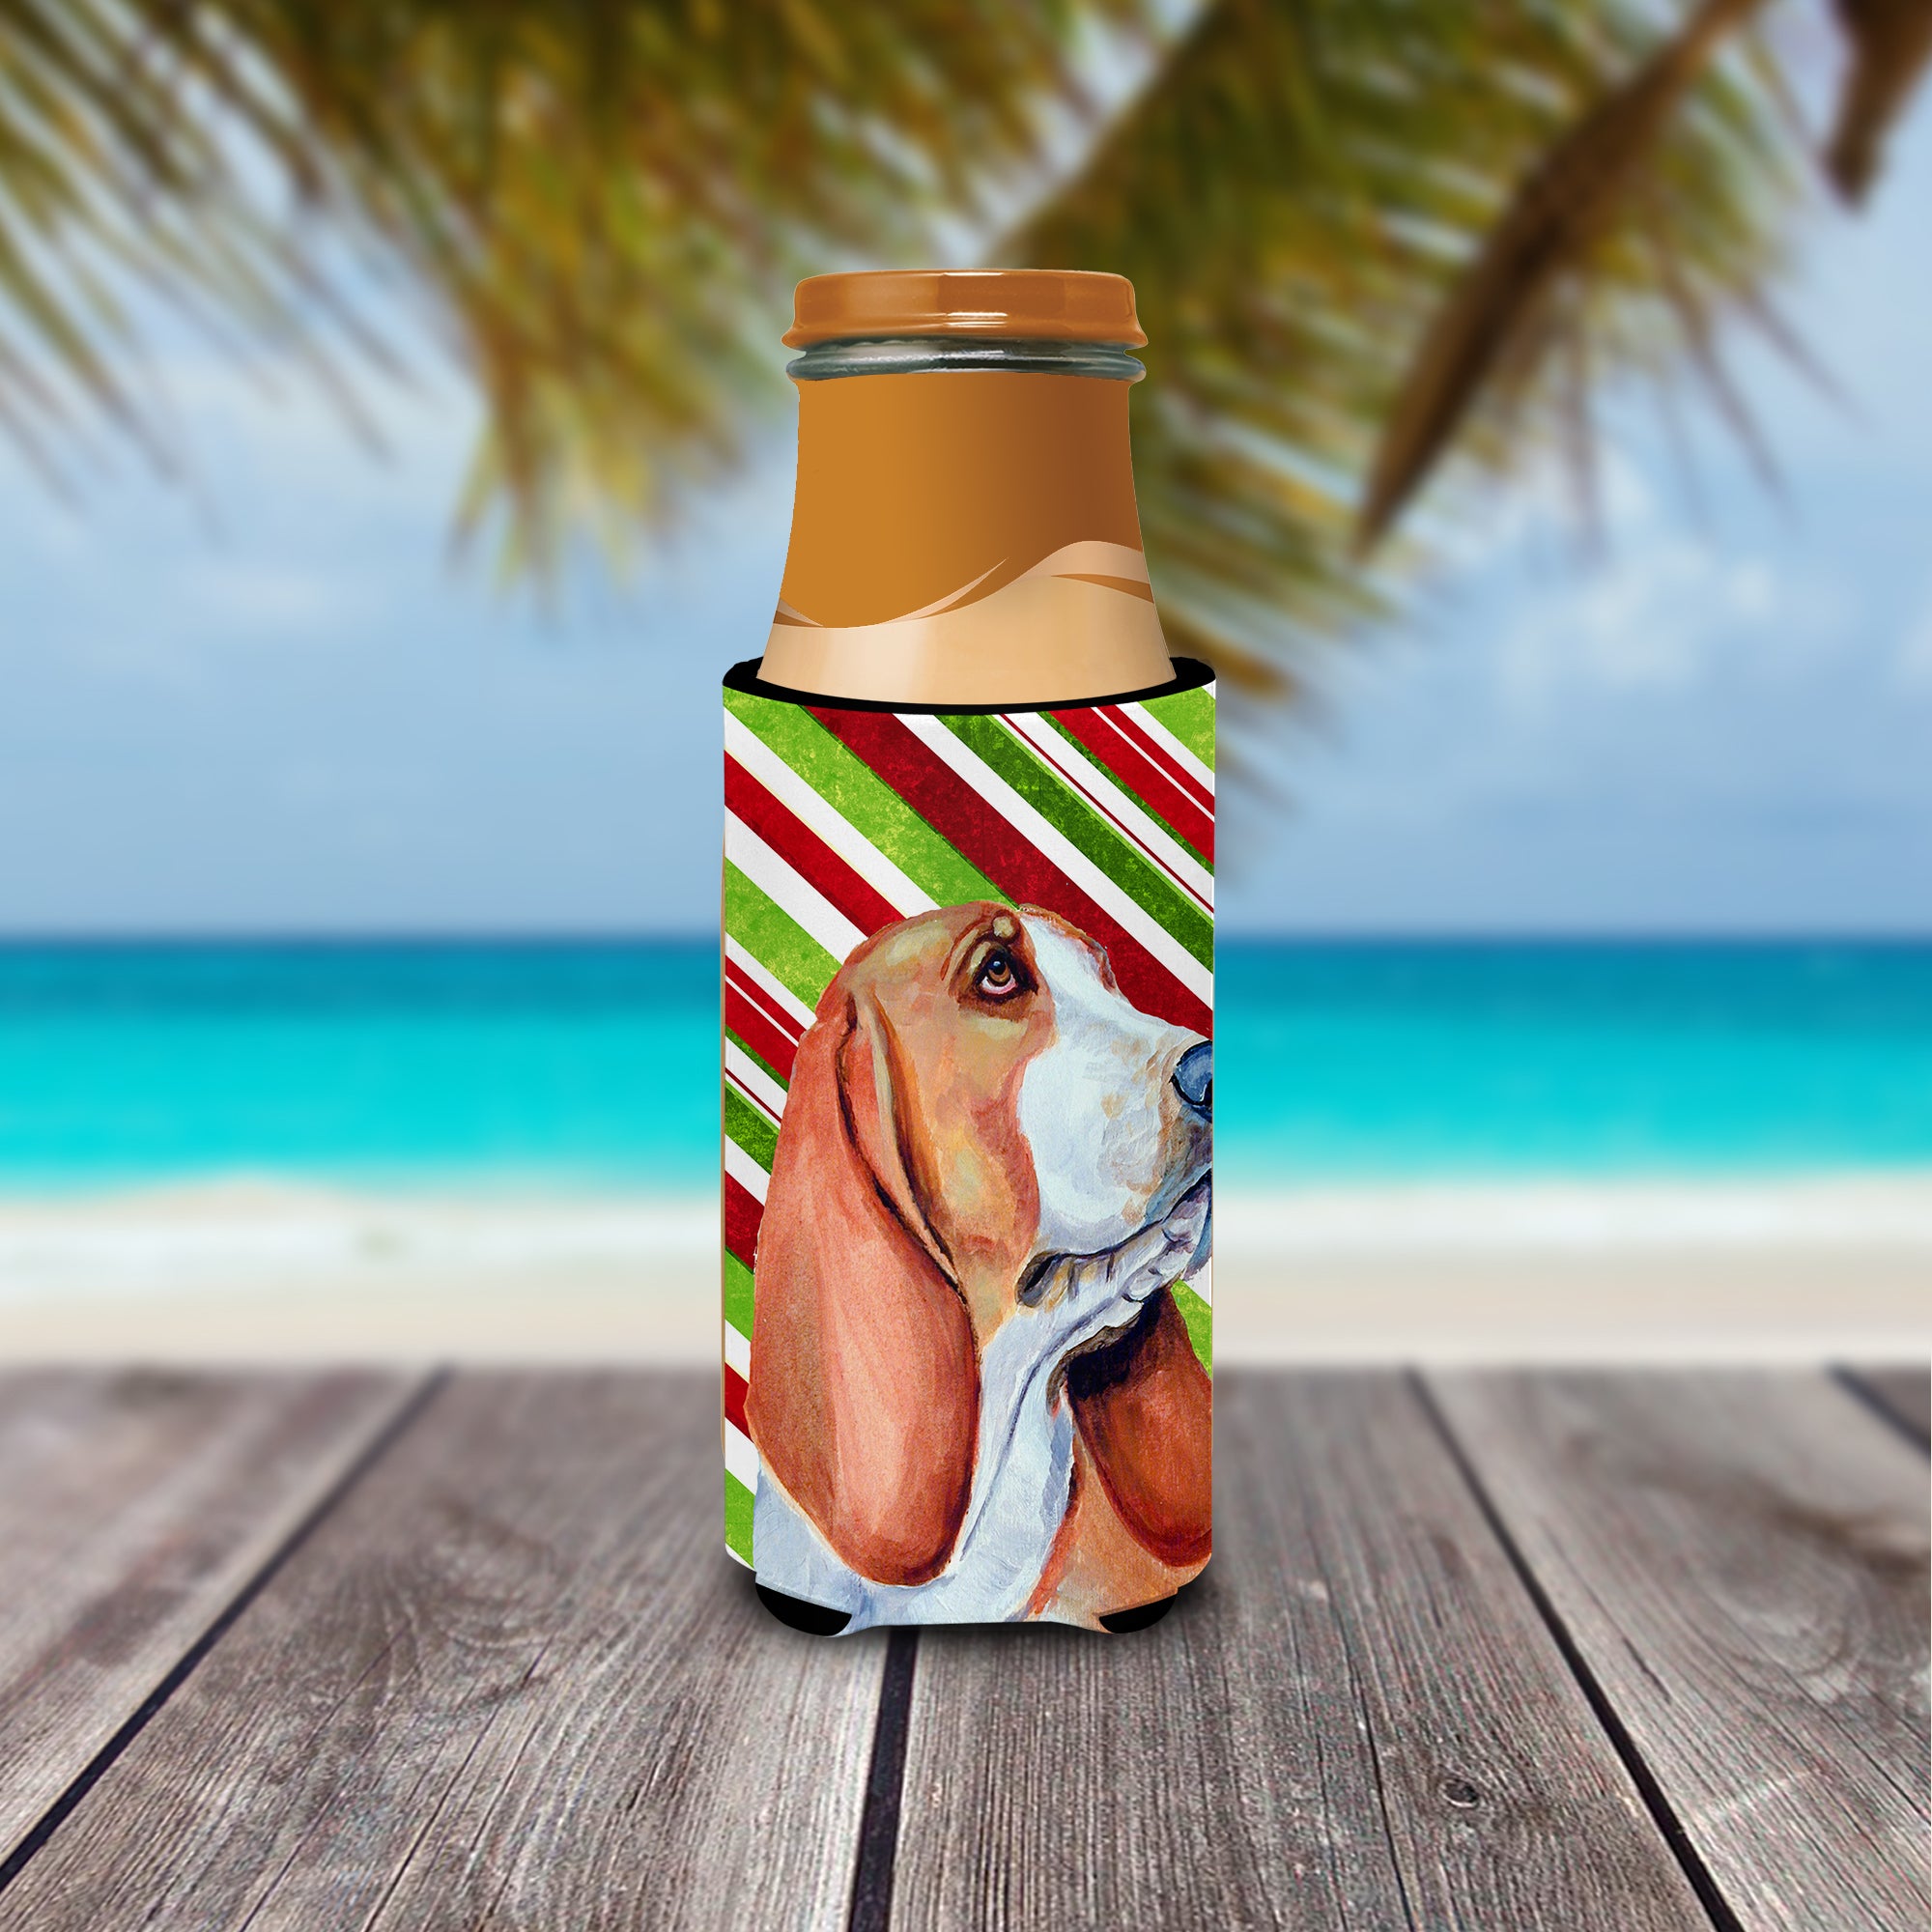 Basset Hound Candy Cane Holiday Christmas Ultra Beverage Insulators for slim cans LH9242MUK